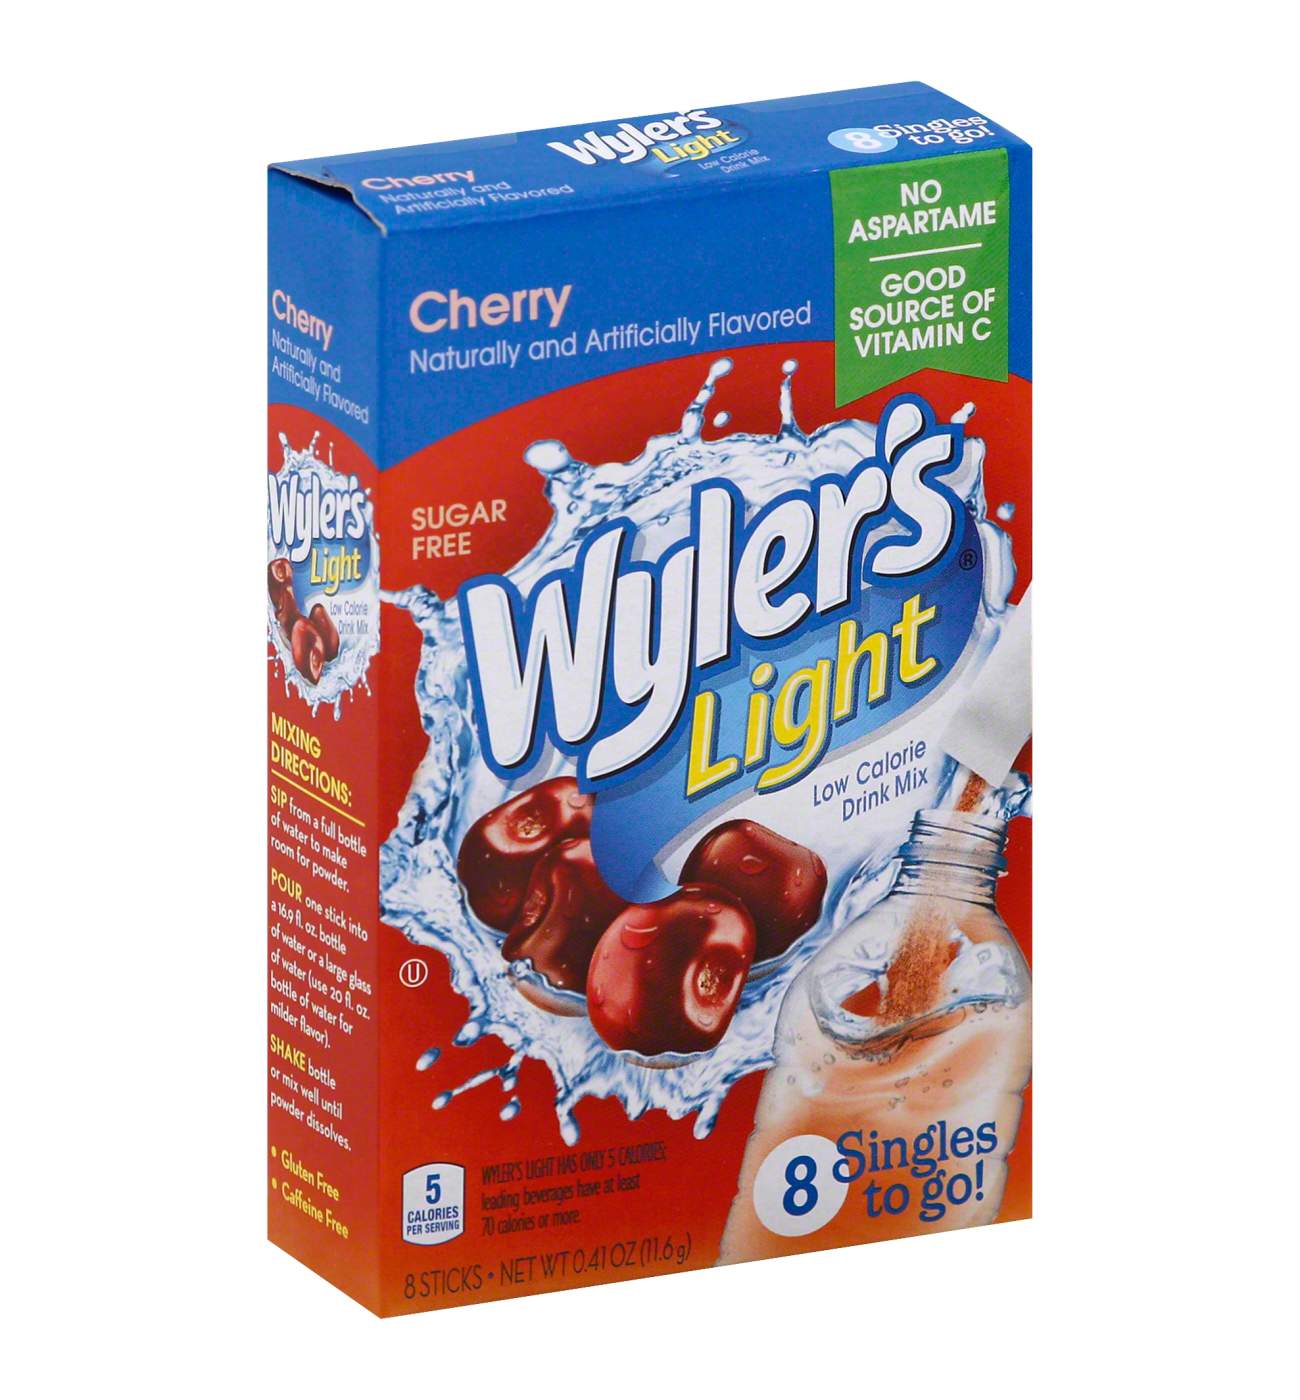 Wyler's Light Singles to Go! Cherry Drink Mix; image 1 of 2